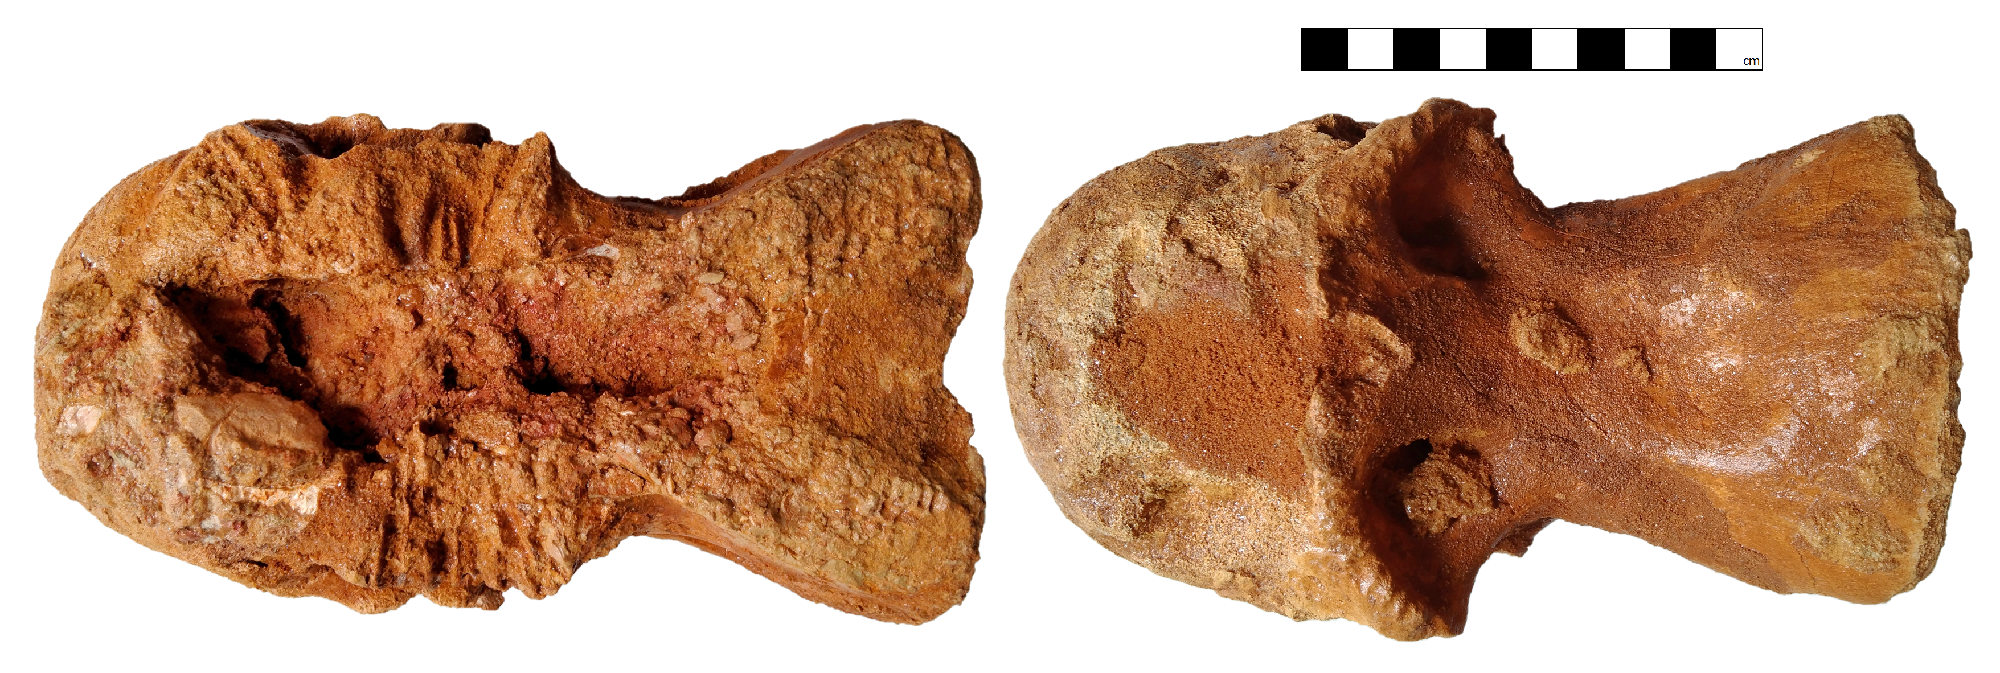 Mid cervical vertebra (GCE2104138334) of Spinosaurid tentatively refer as Spinosaurus dorsojuvencus. From left image: in dorsal view (top view, anterior face to the left); Right image: in ventral view (bottom view, anterior face to the left)